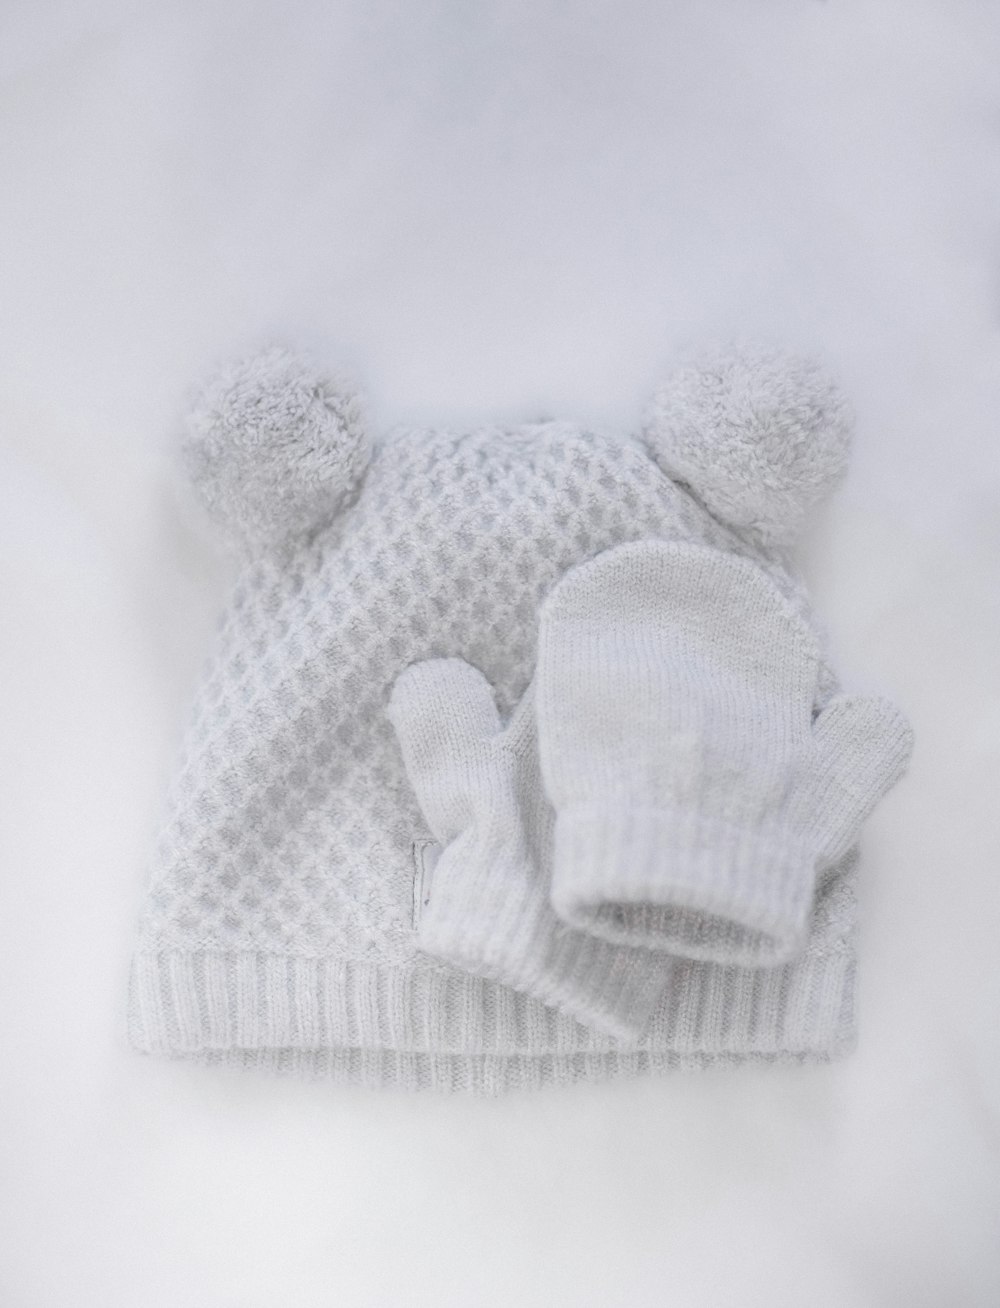 a white knitted hat and mitten on a white background